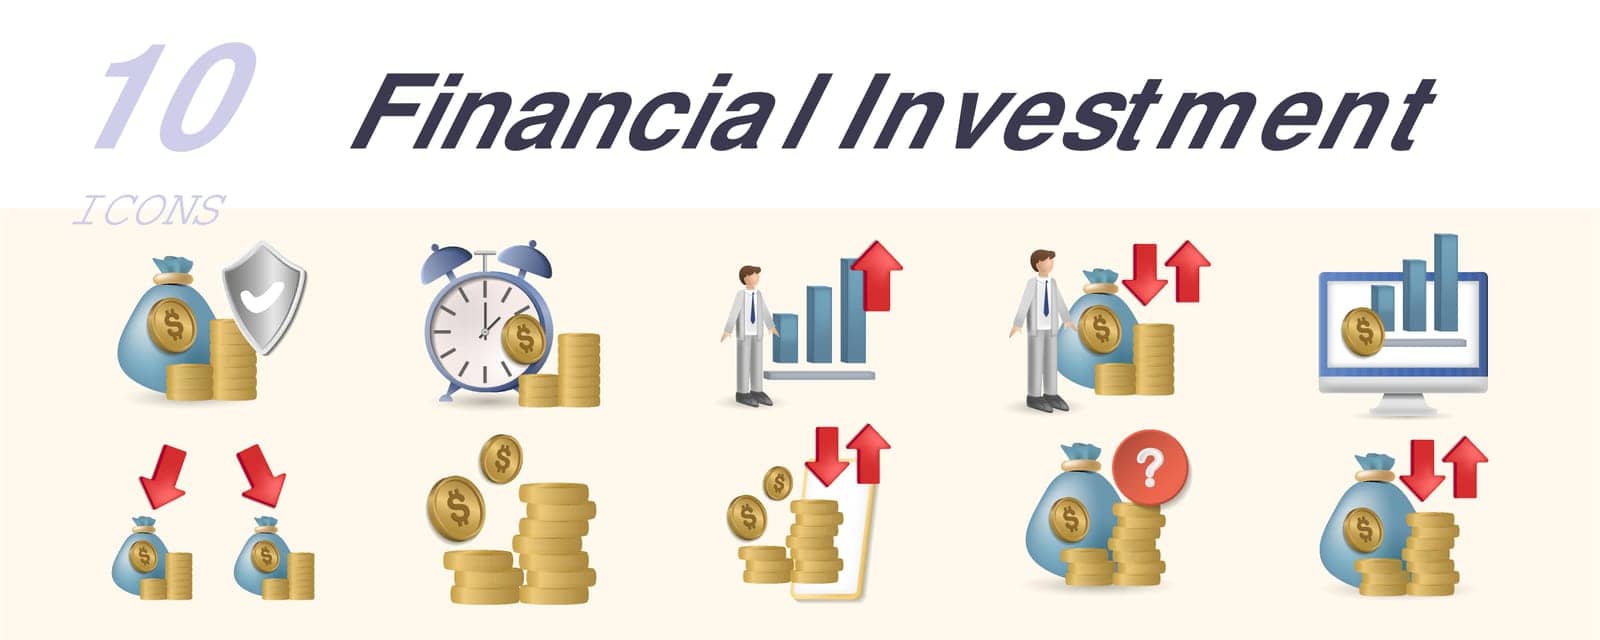 Financial investment icons set. Creative elements: investment security, duration, high growth opportunities, investor, economy, investment choice, currency, platform, information, investment.